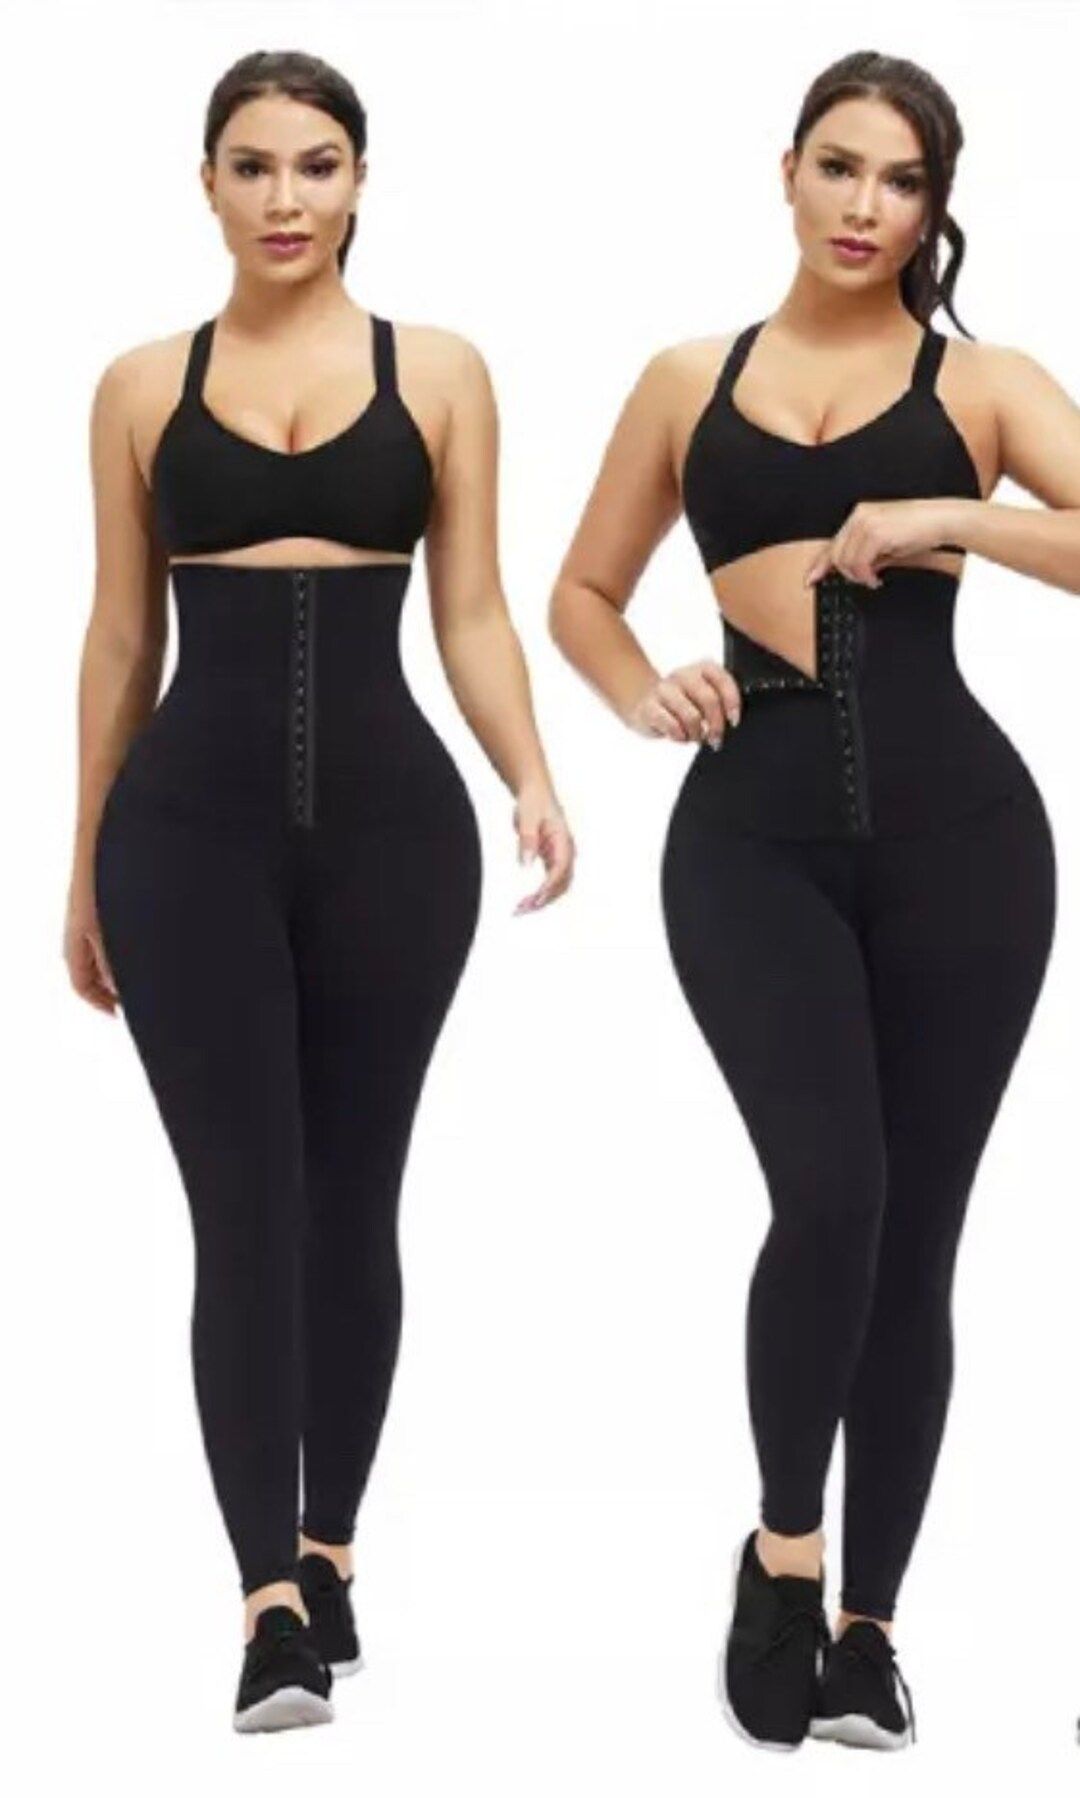 How To Use A Waist Trainer Corset